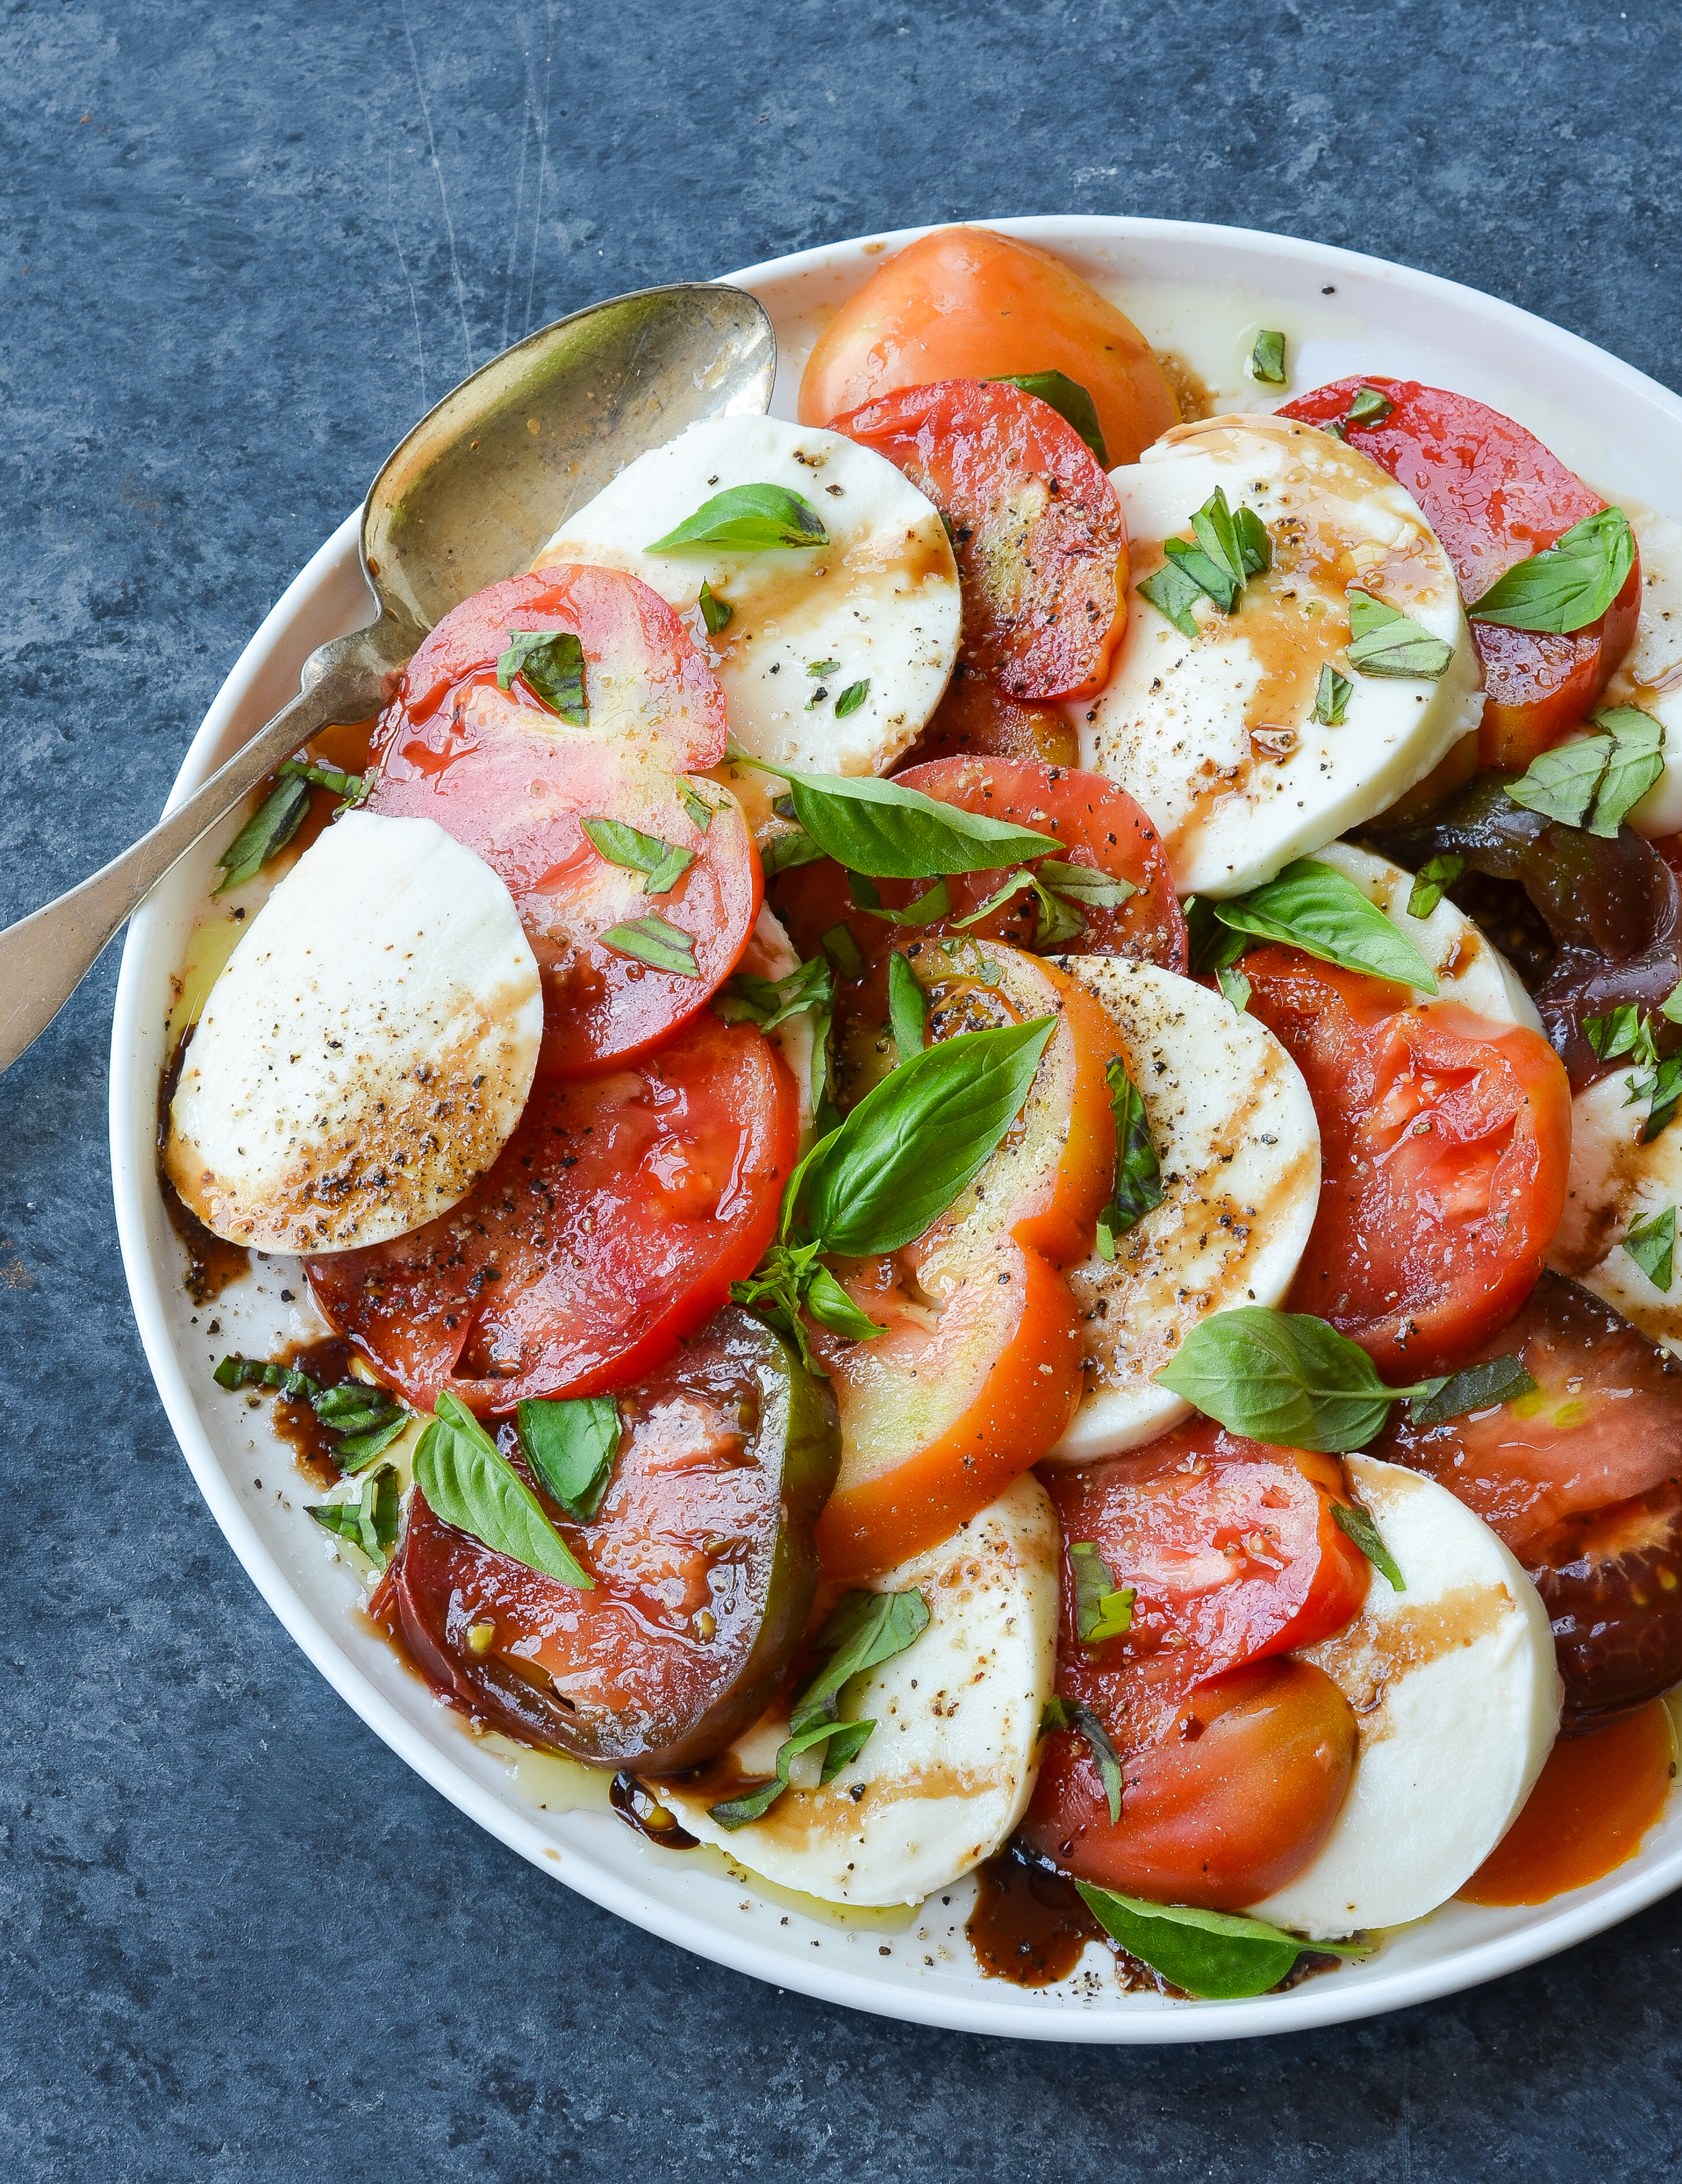 Caprese Salad with Balsamic Reduction